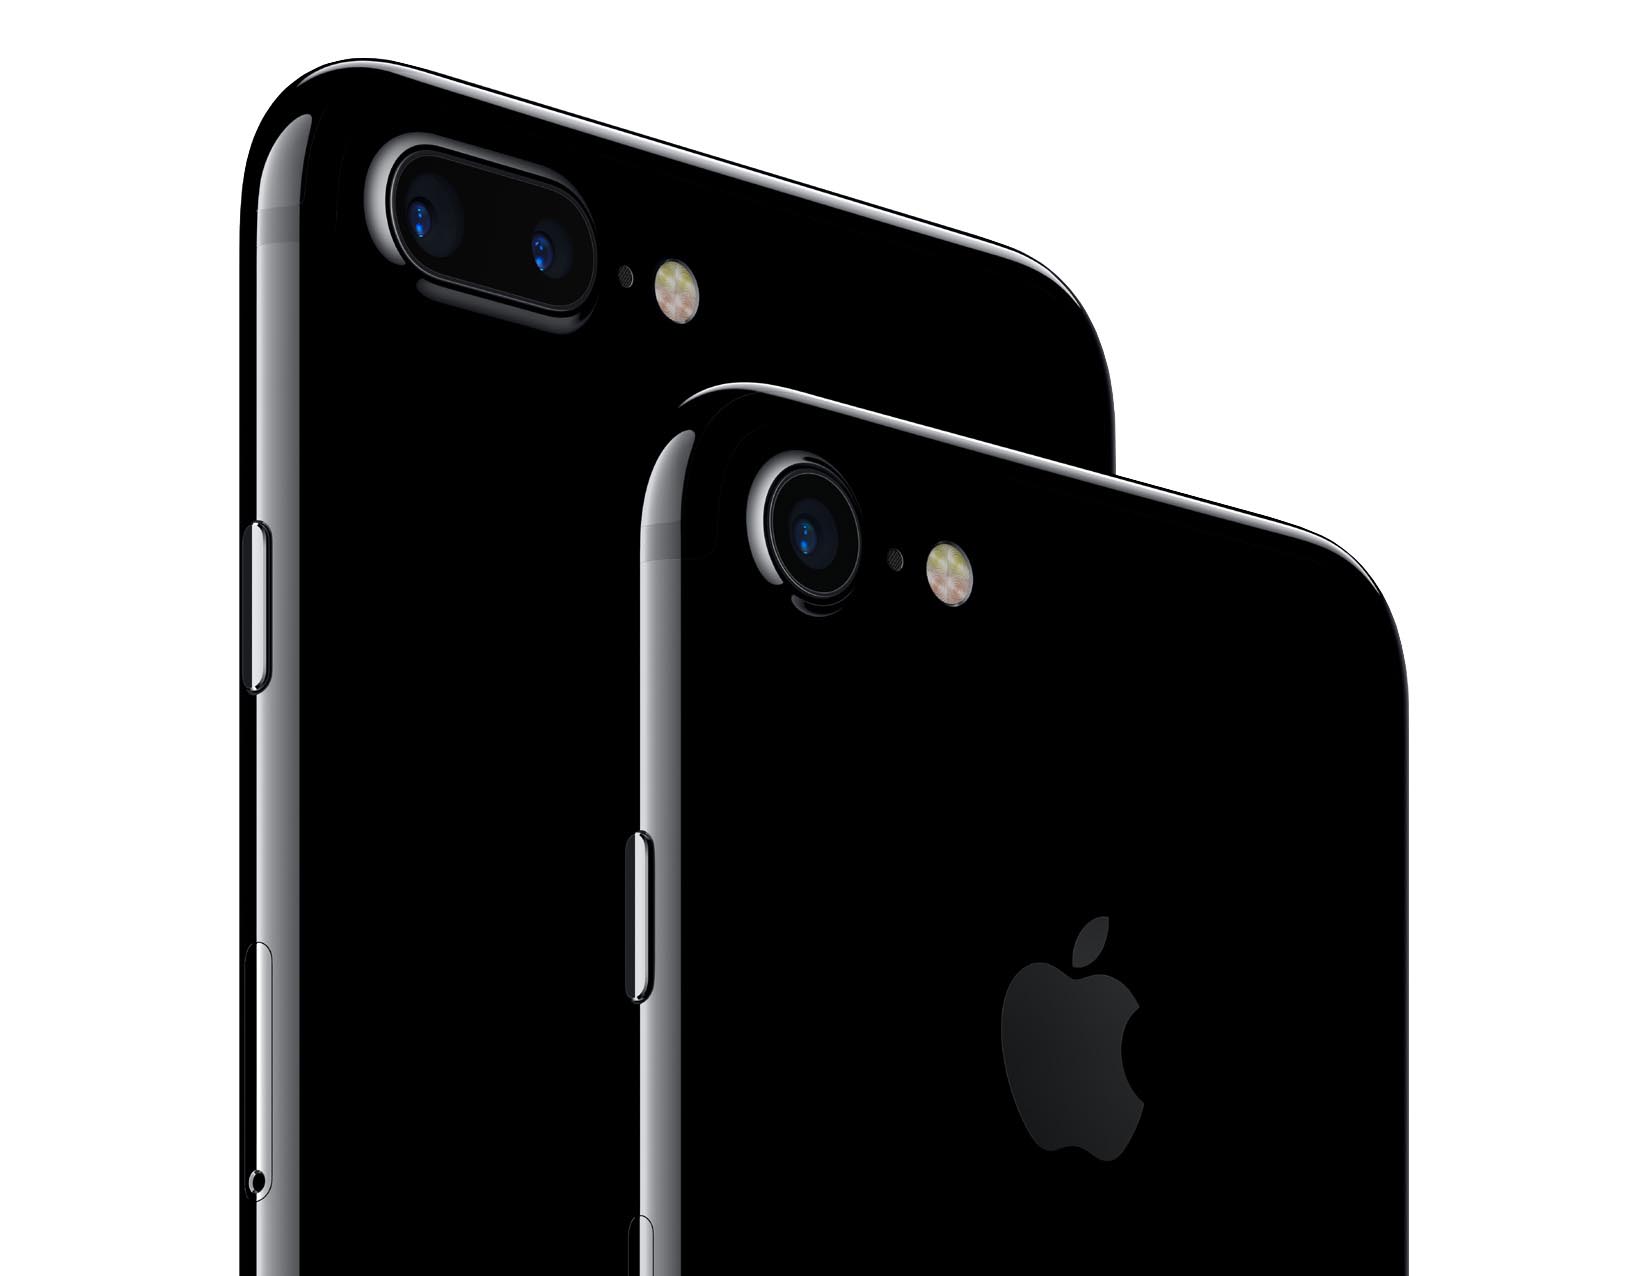 iPhone 7 & iPhone 7 Plus pricing details for 12 regions have been listed here